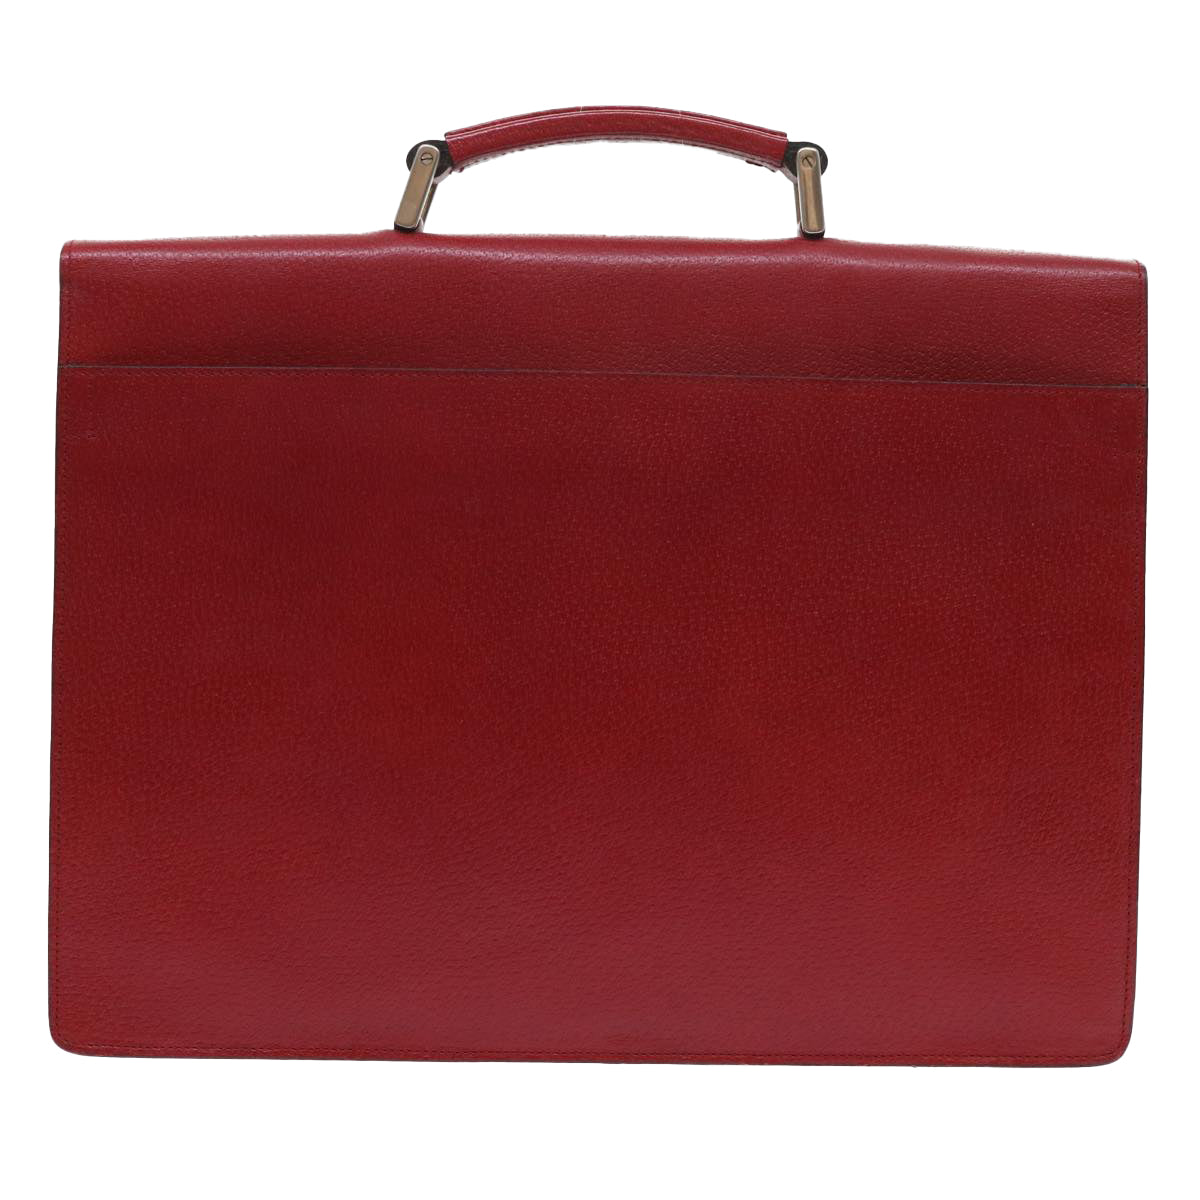 PRADA Business Bag Leather Red Auth bs8456 - 0